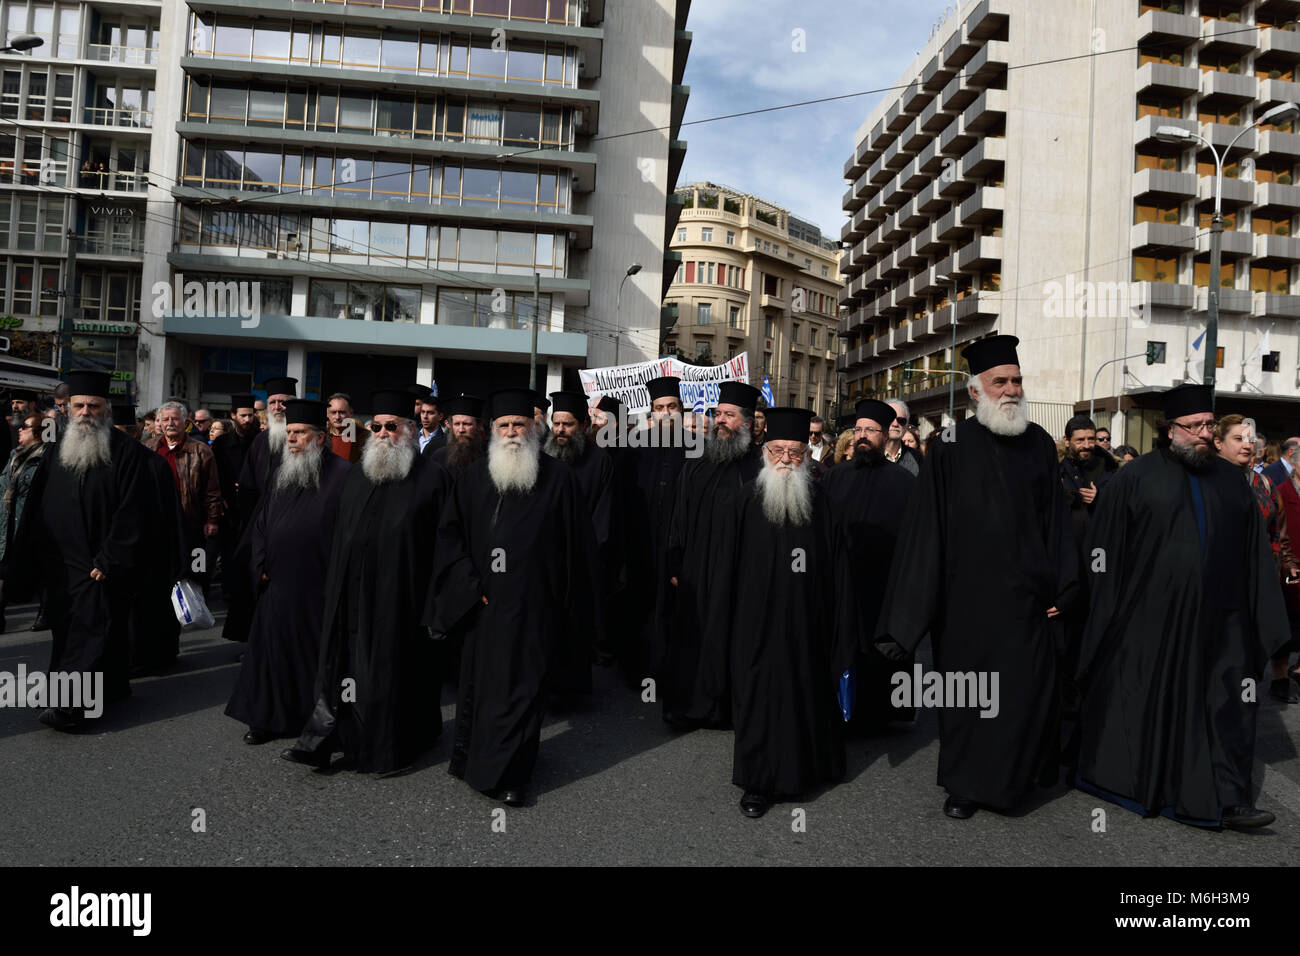 Athens, Greece, 4th March, 2018. Greek Orthodox priests head the protest march against changes in the school religion textbooks in Athens, Greece. Credit: Nicolas Koutsokostas/Alamy Live News. Stock Photo